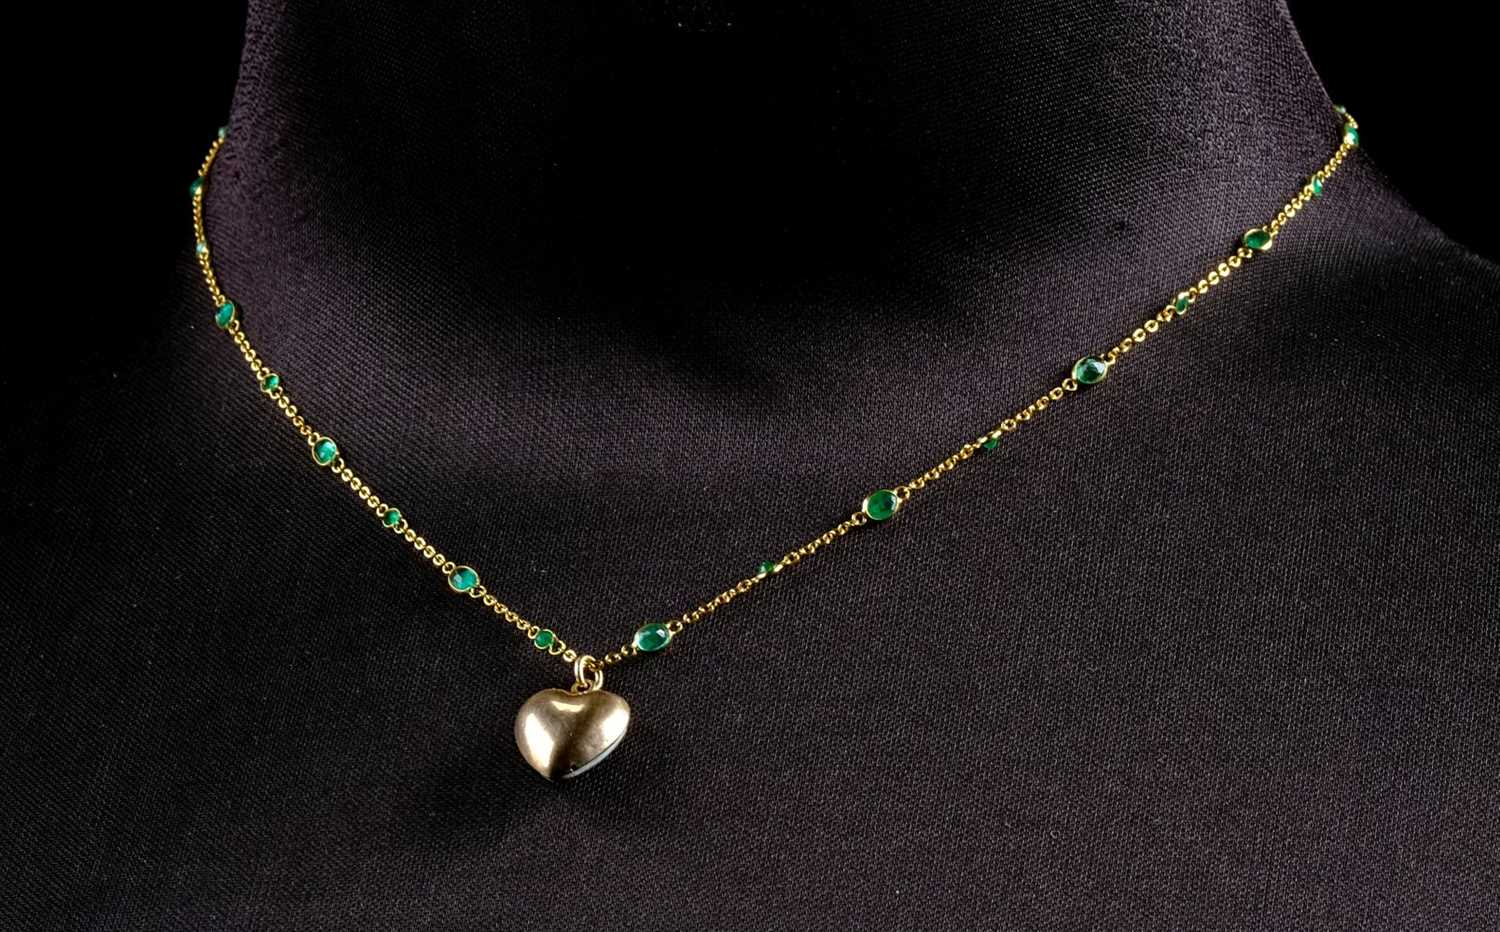 Lot 16 - Necklace. An 18ct gold chain set